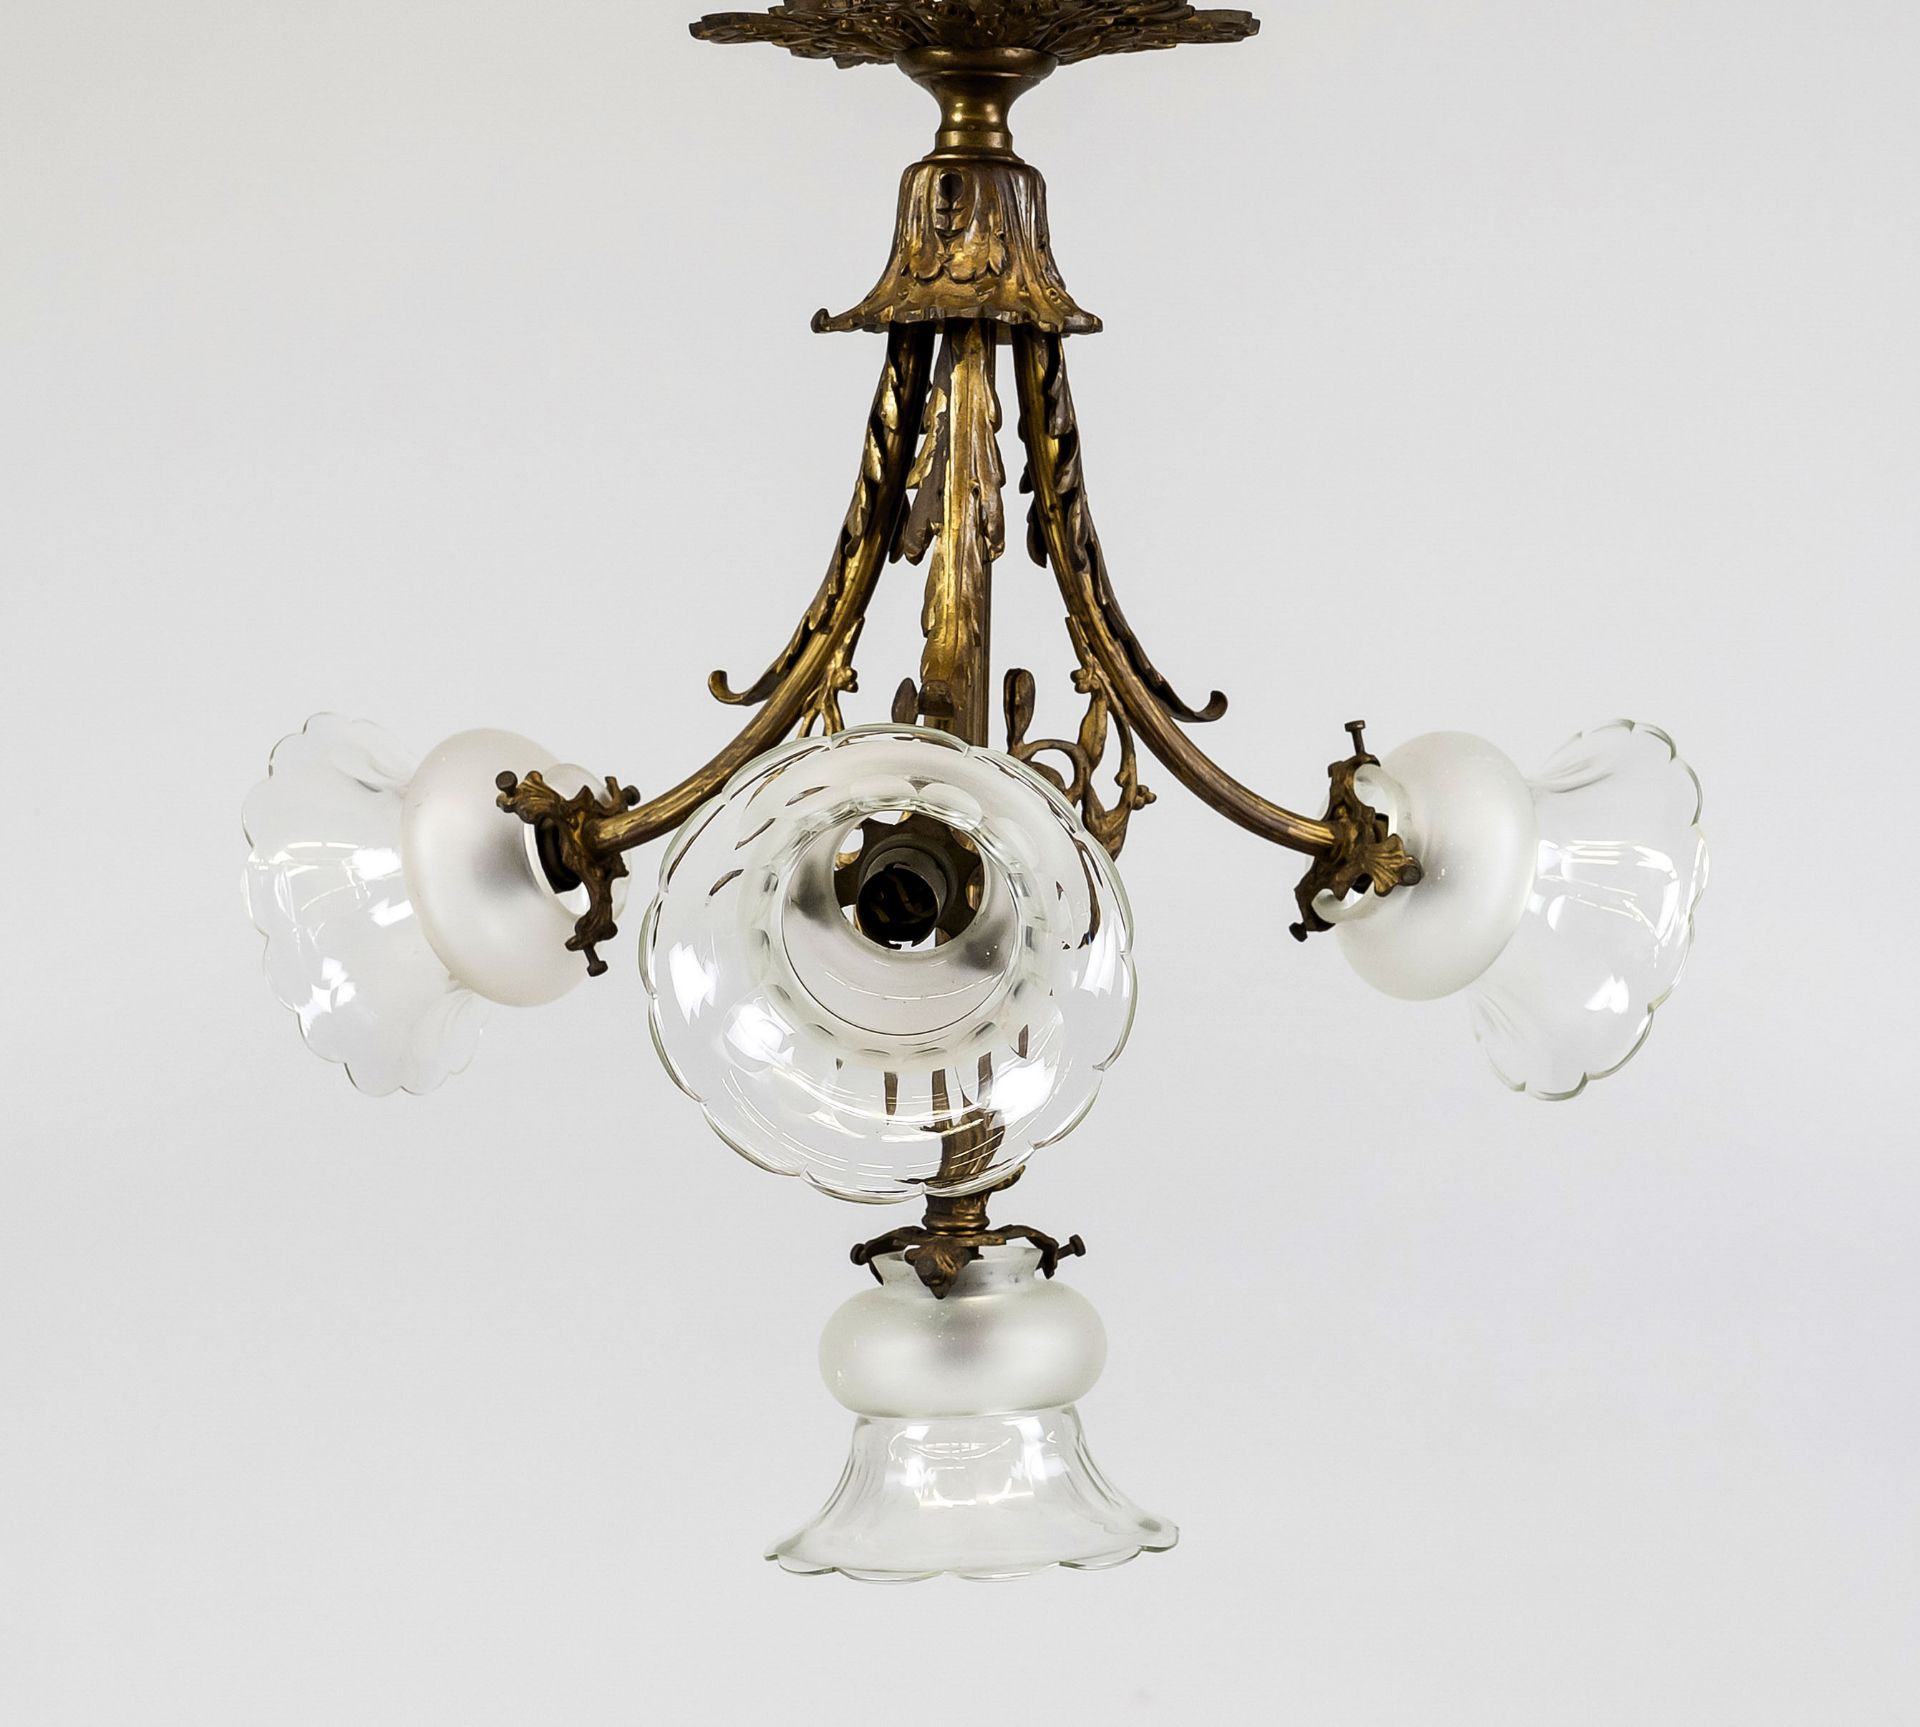 Ceiling lamp, late 19th century, 4 perennial shafts with foliage overlay. Flower-shaped shades of